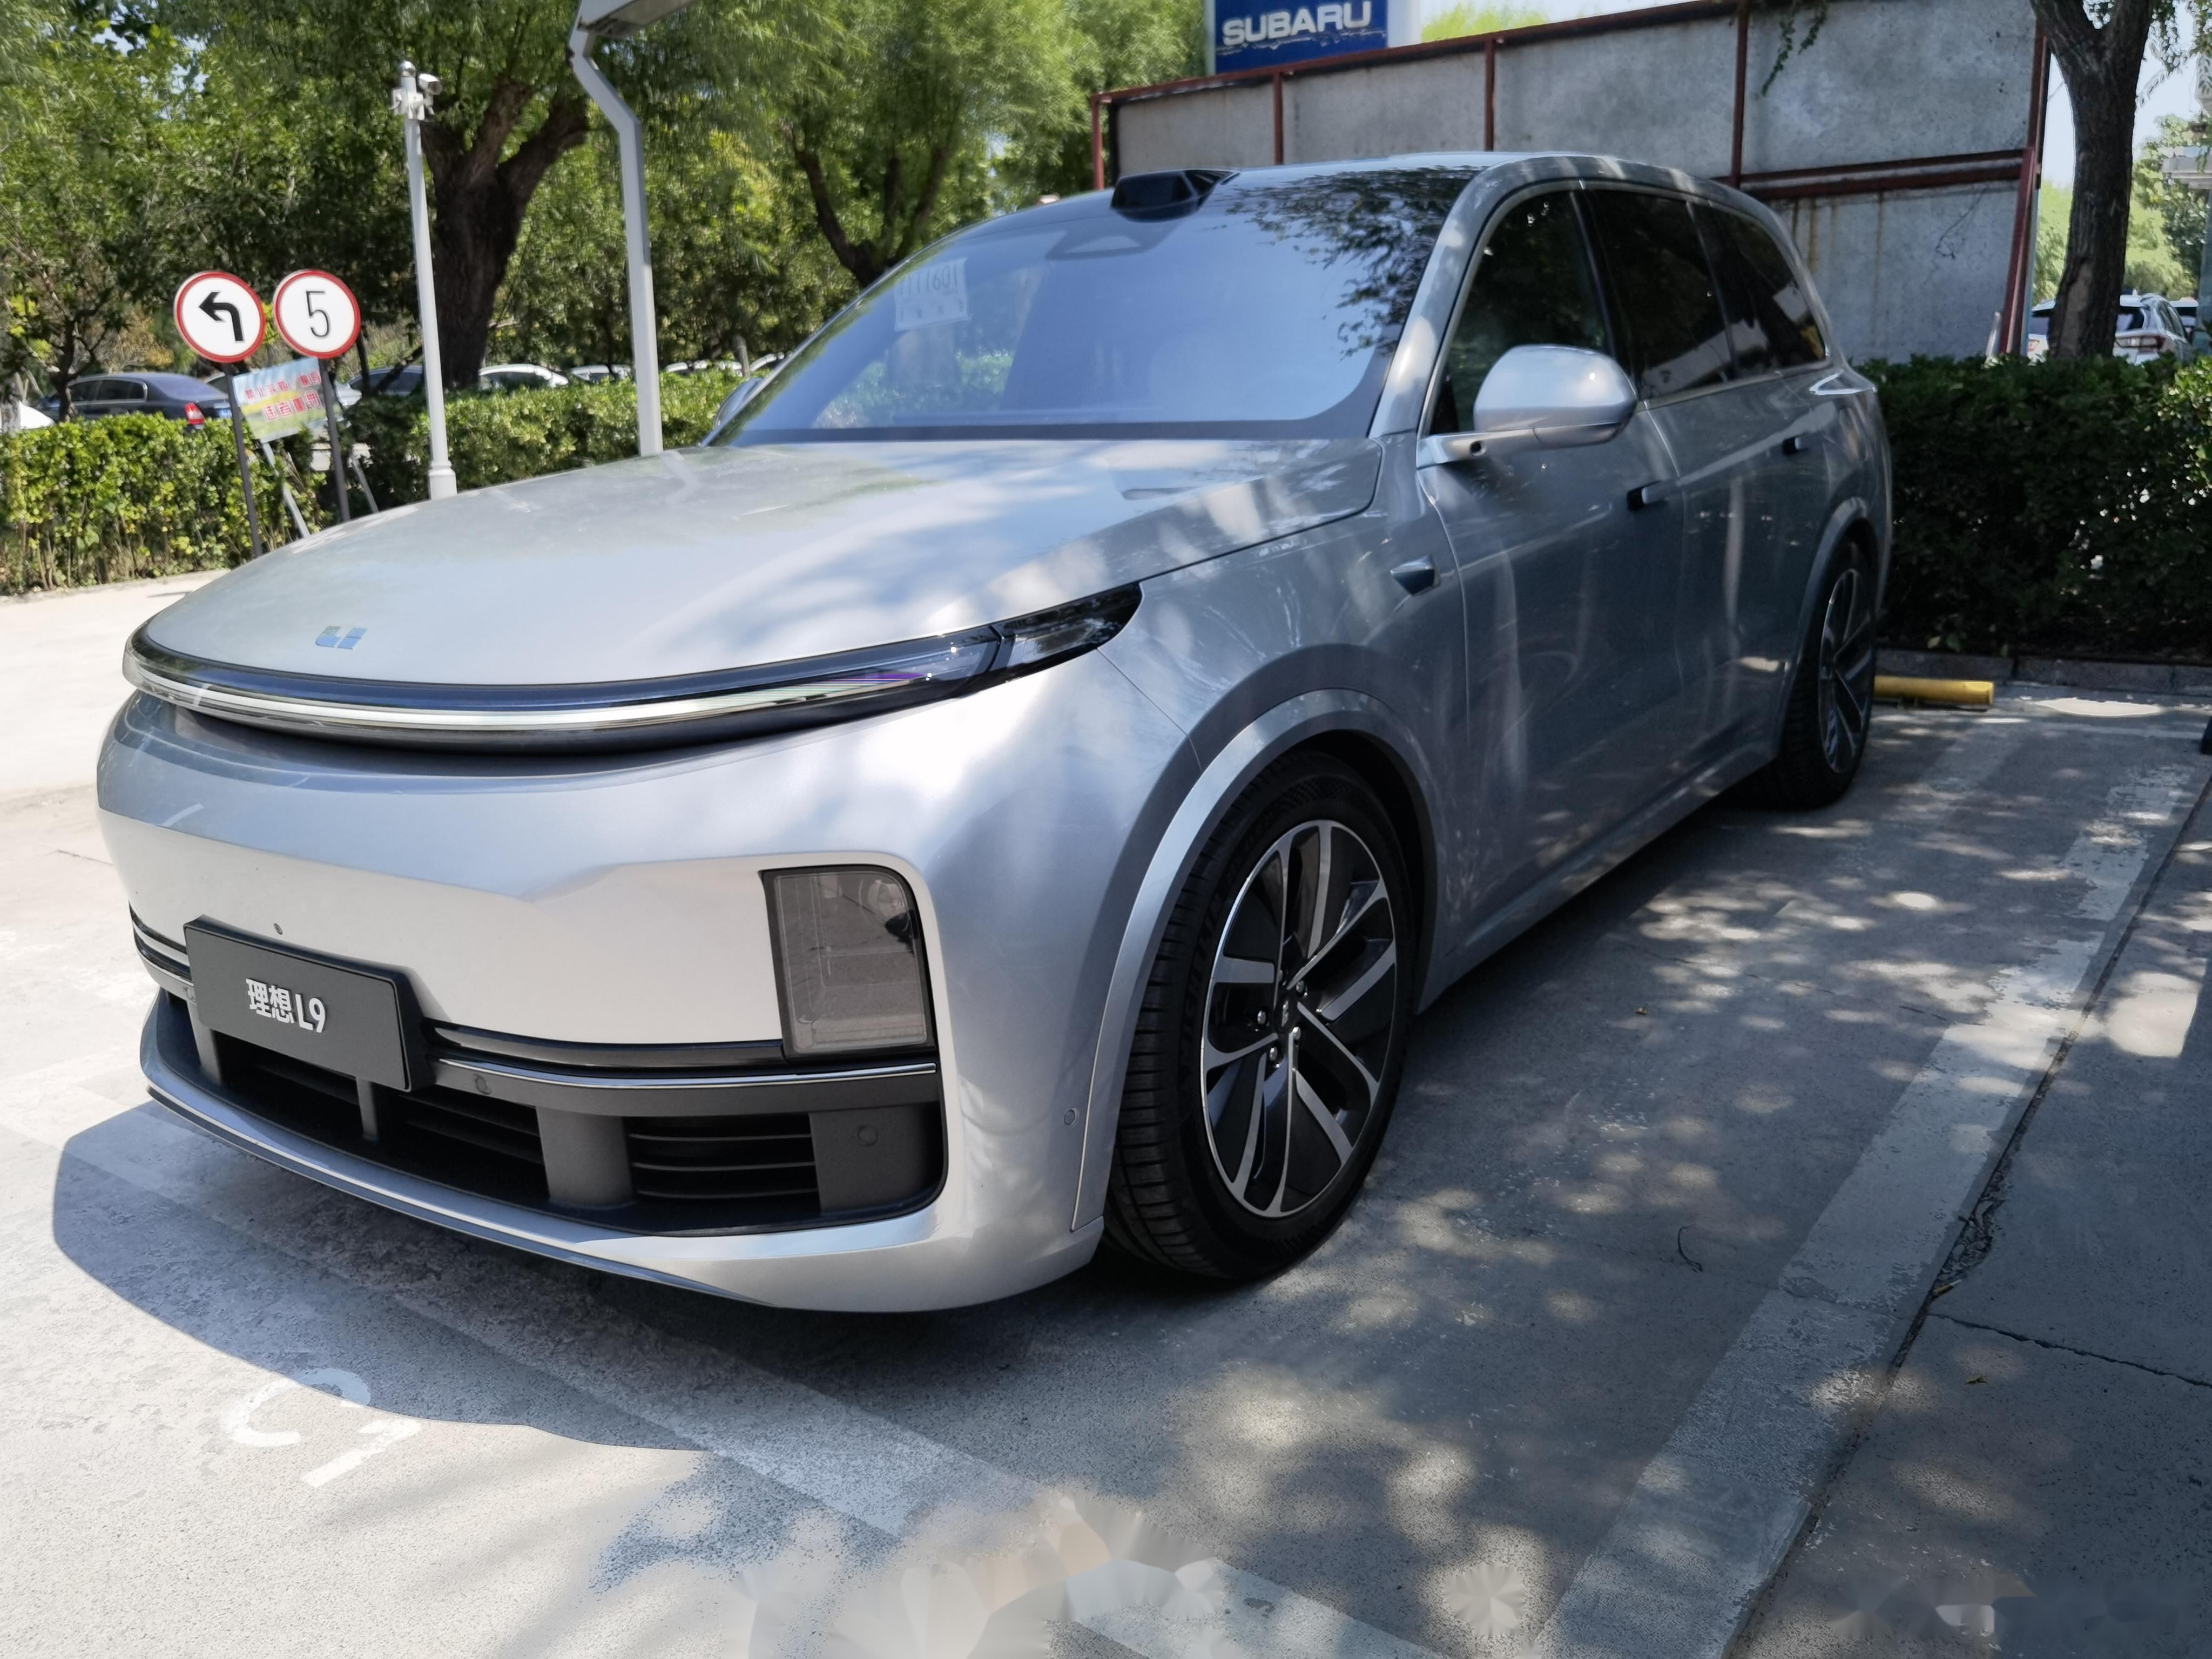 Li Auto L9 SUV Official Images Released In China